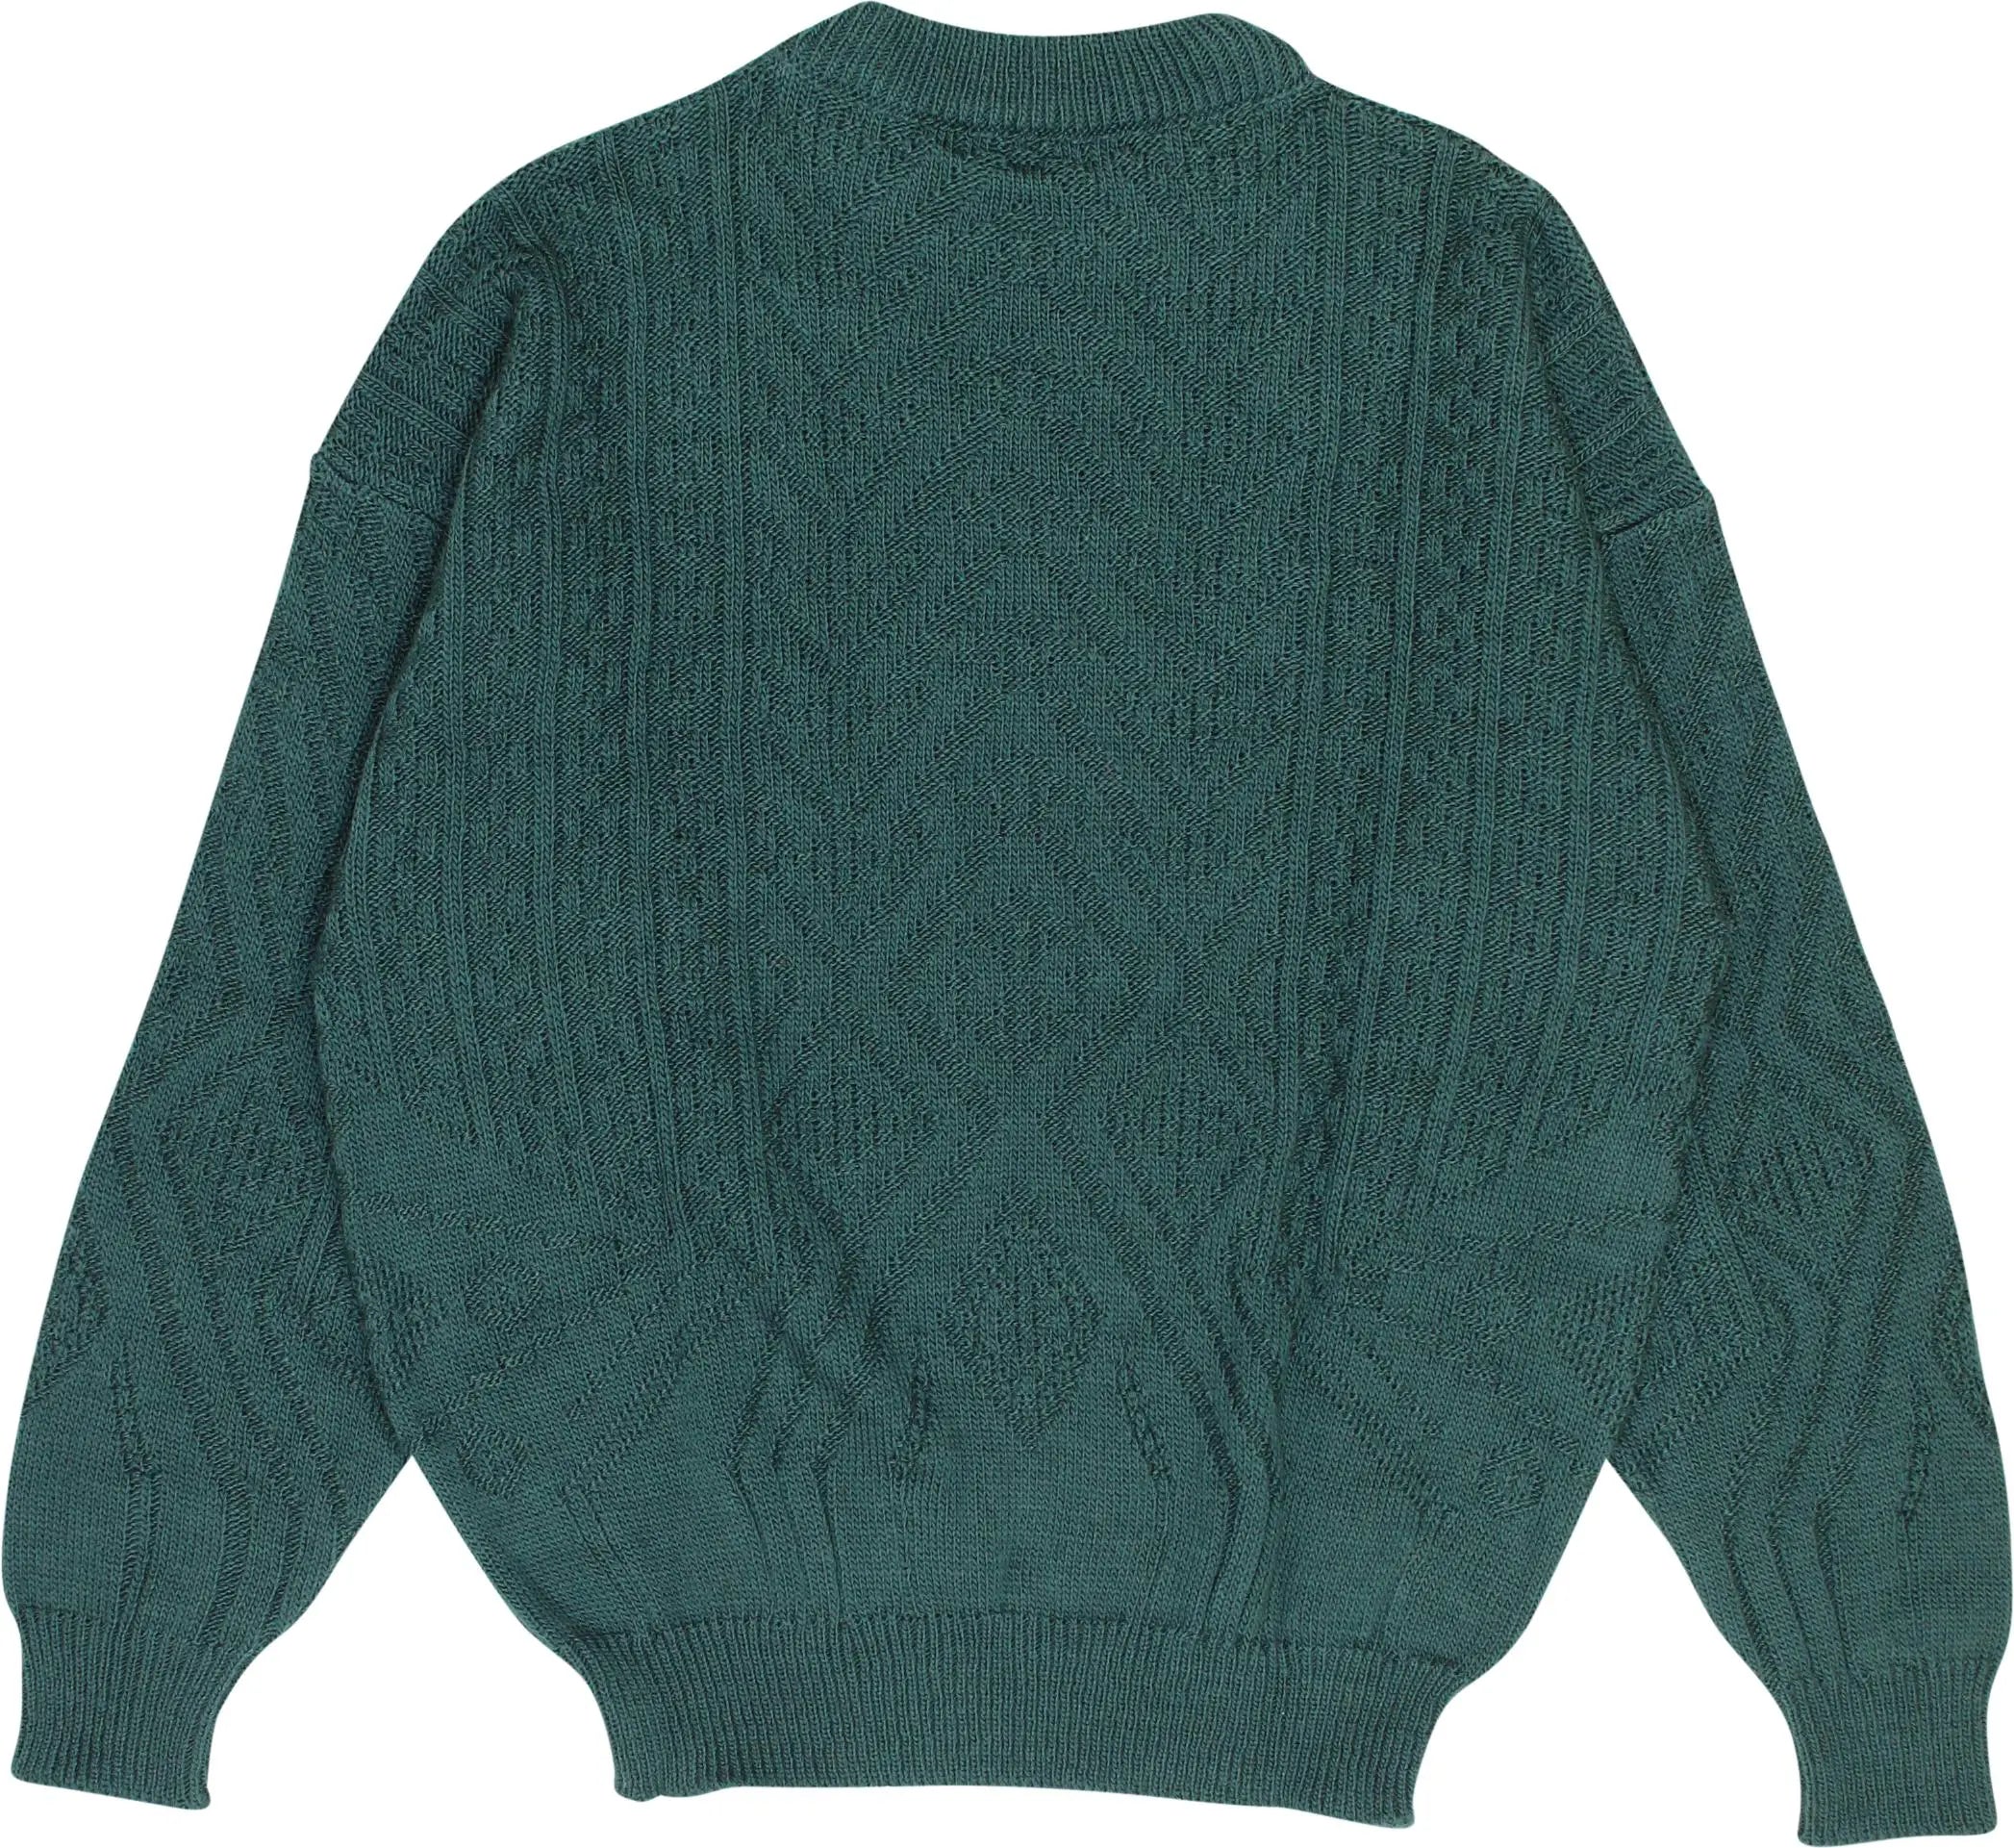 Unknown - Green Wool Blend Jumper- ThriftTale.com - Vintage and second handclothing